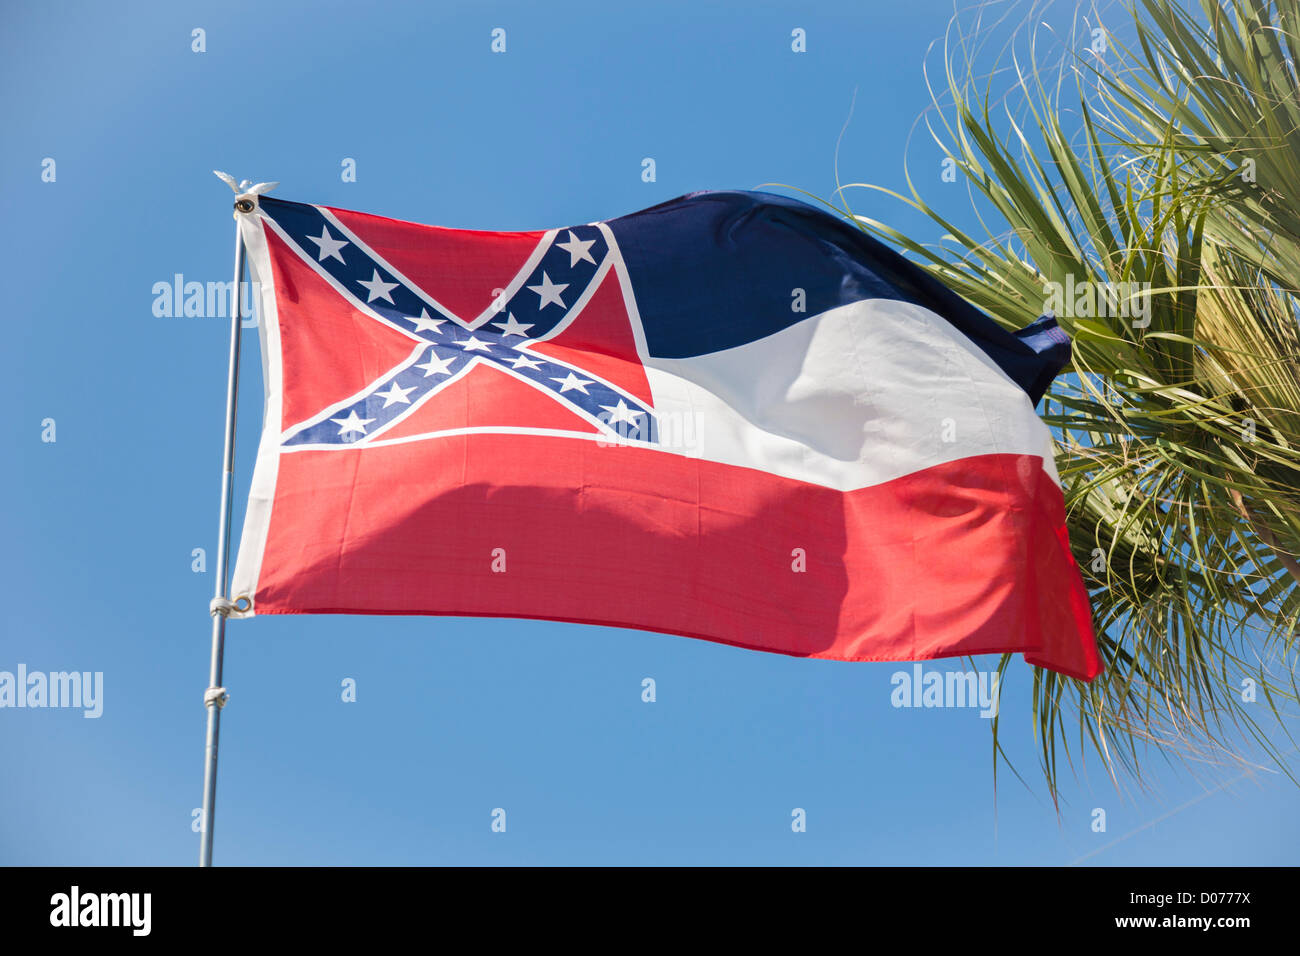 Flag of the state of Mississippi flying near palm tree Stock Photo